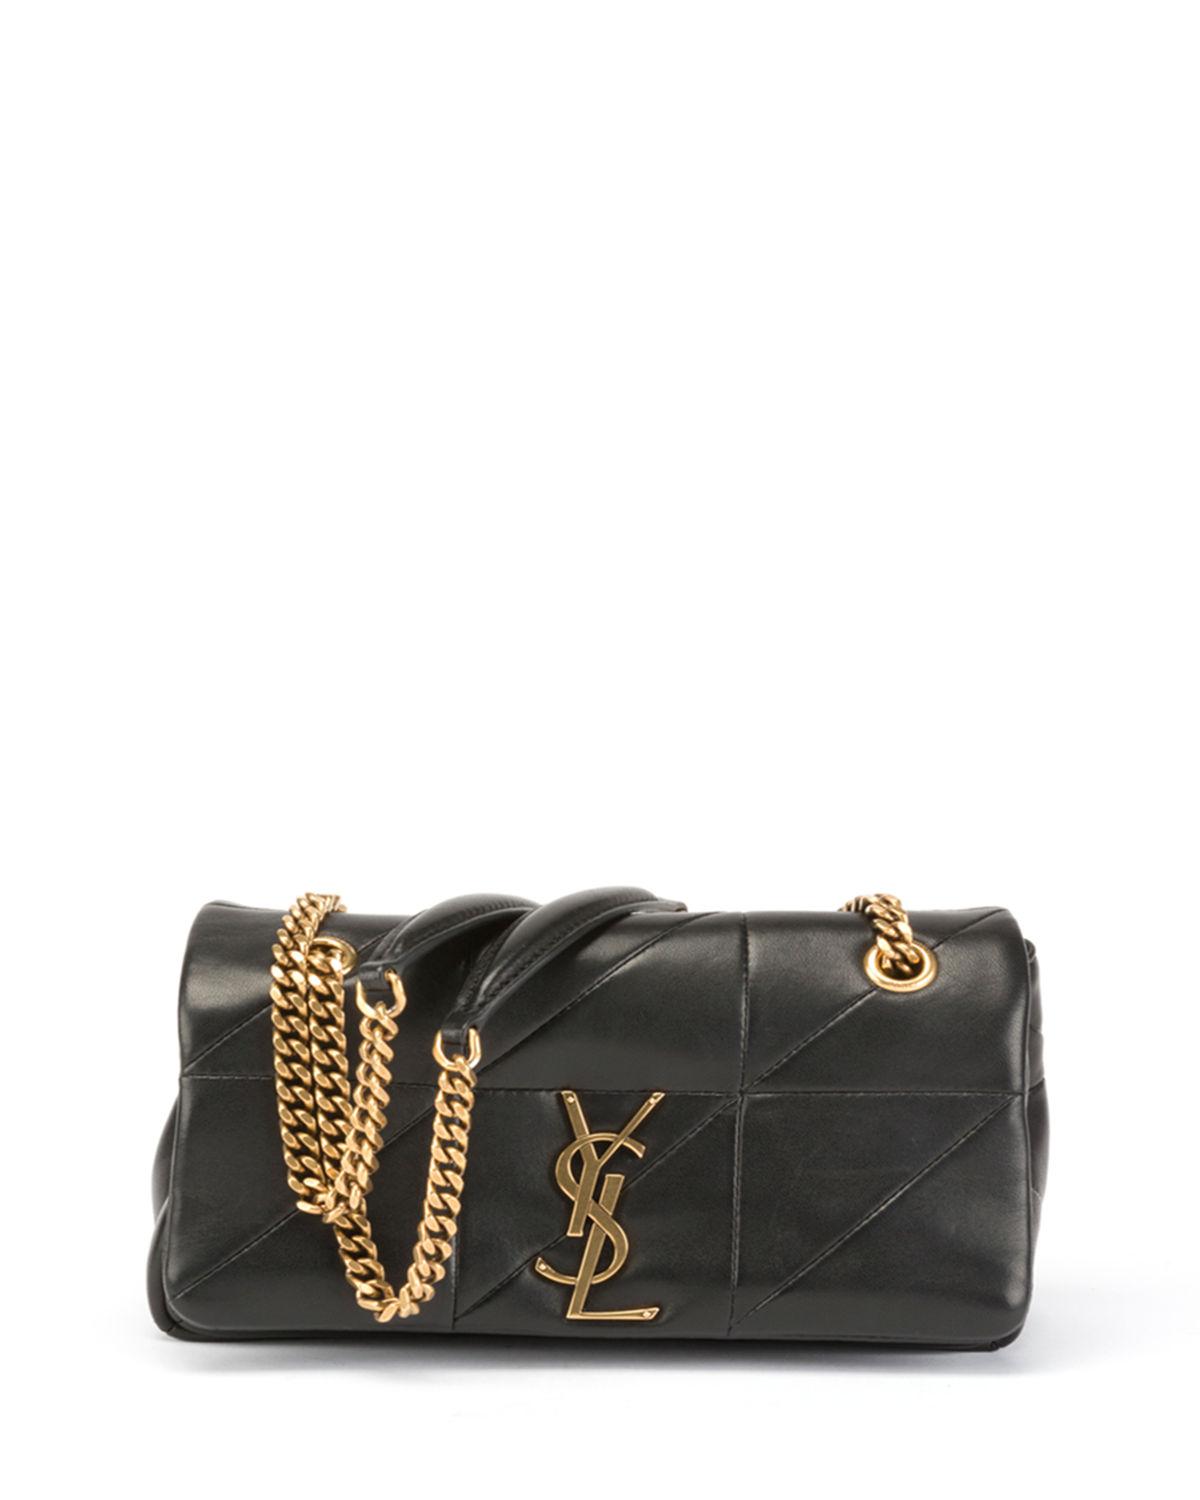 Lyst - Saint Laurent Jamie Small Diamond-quilted Chain Shoulder Bag in Black